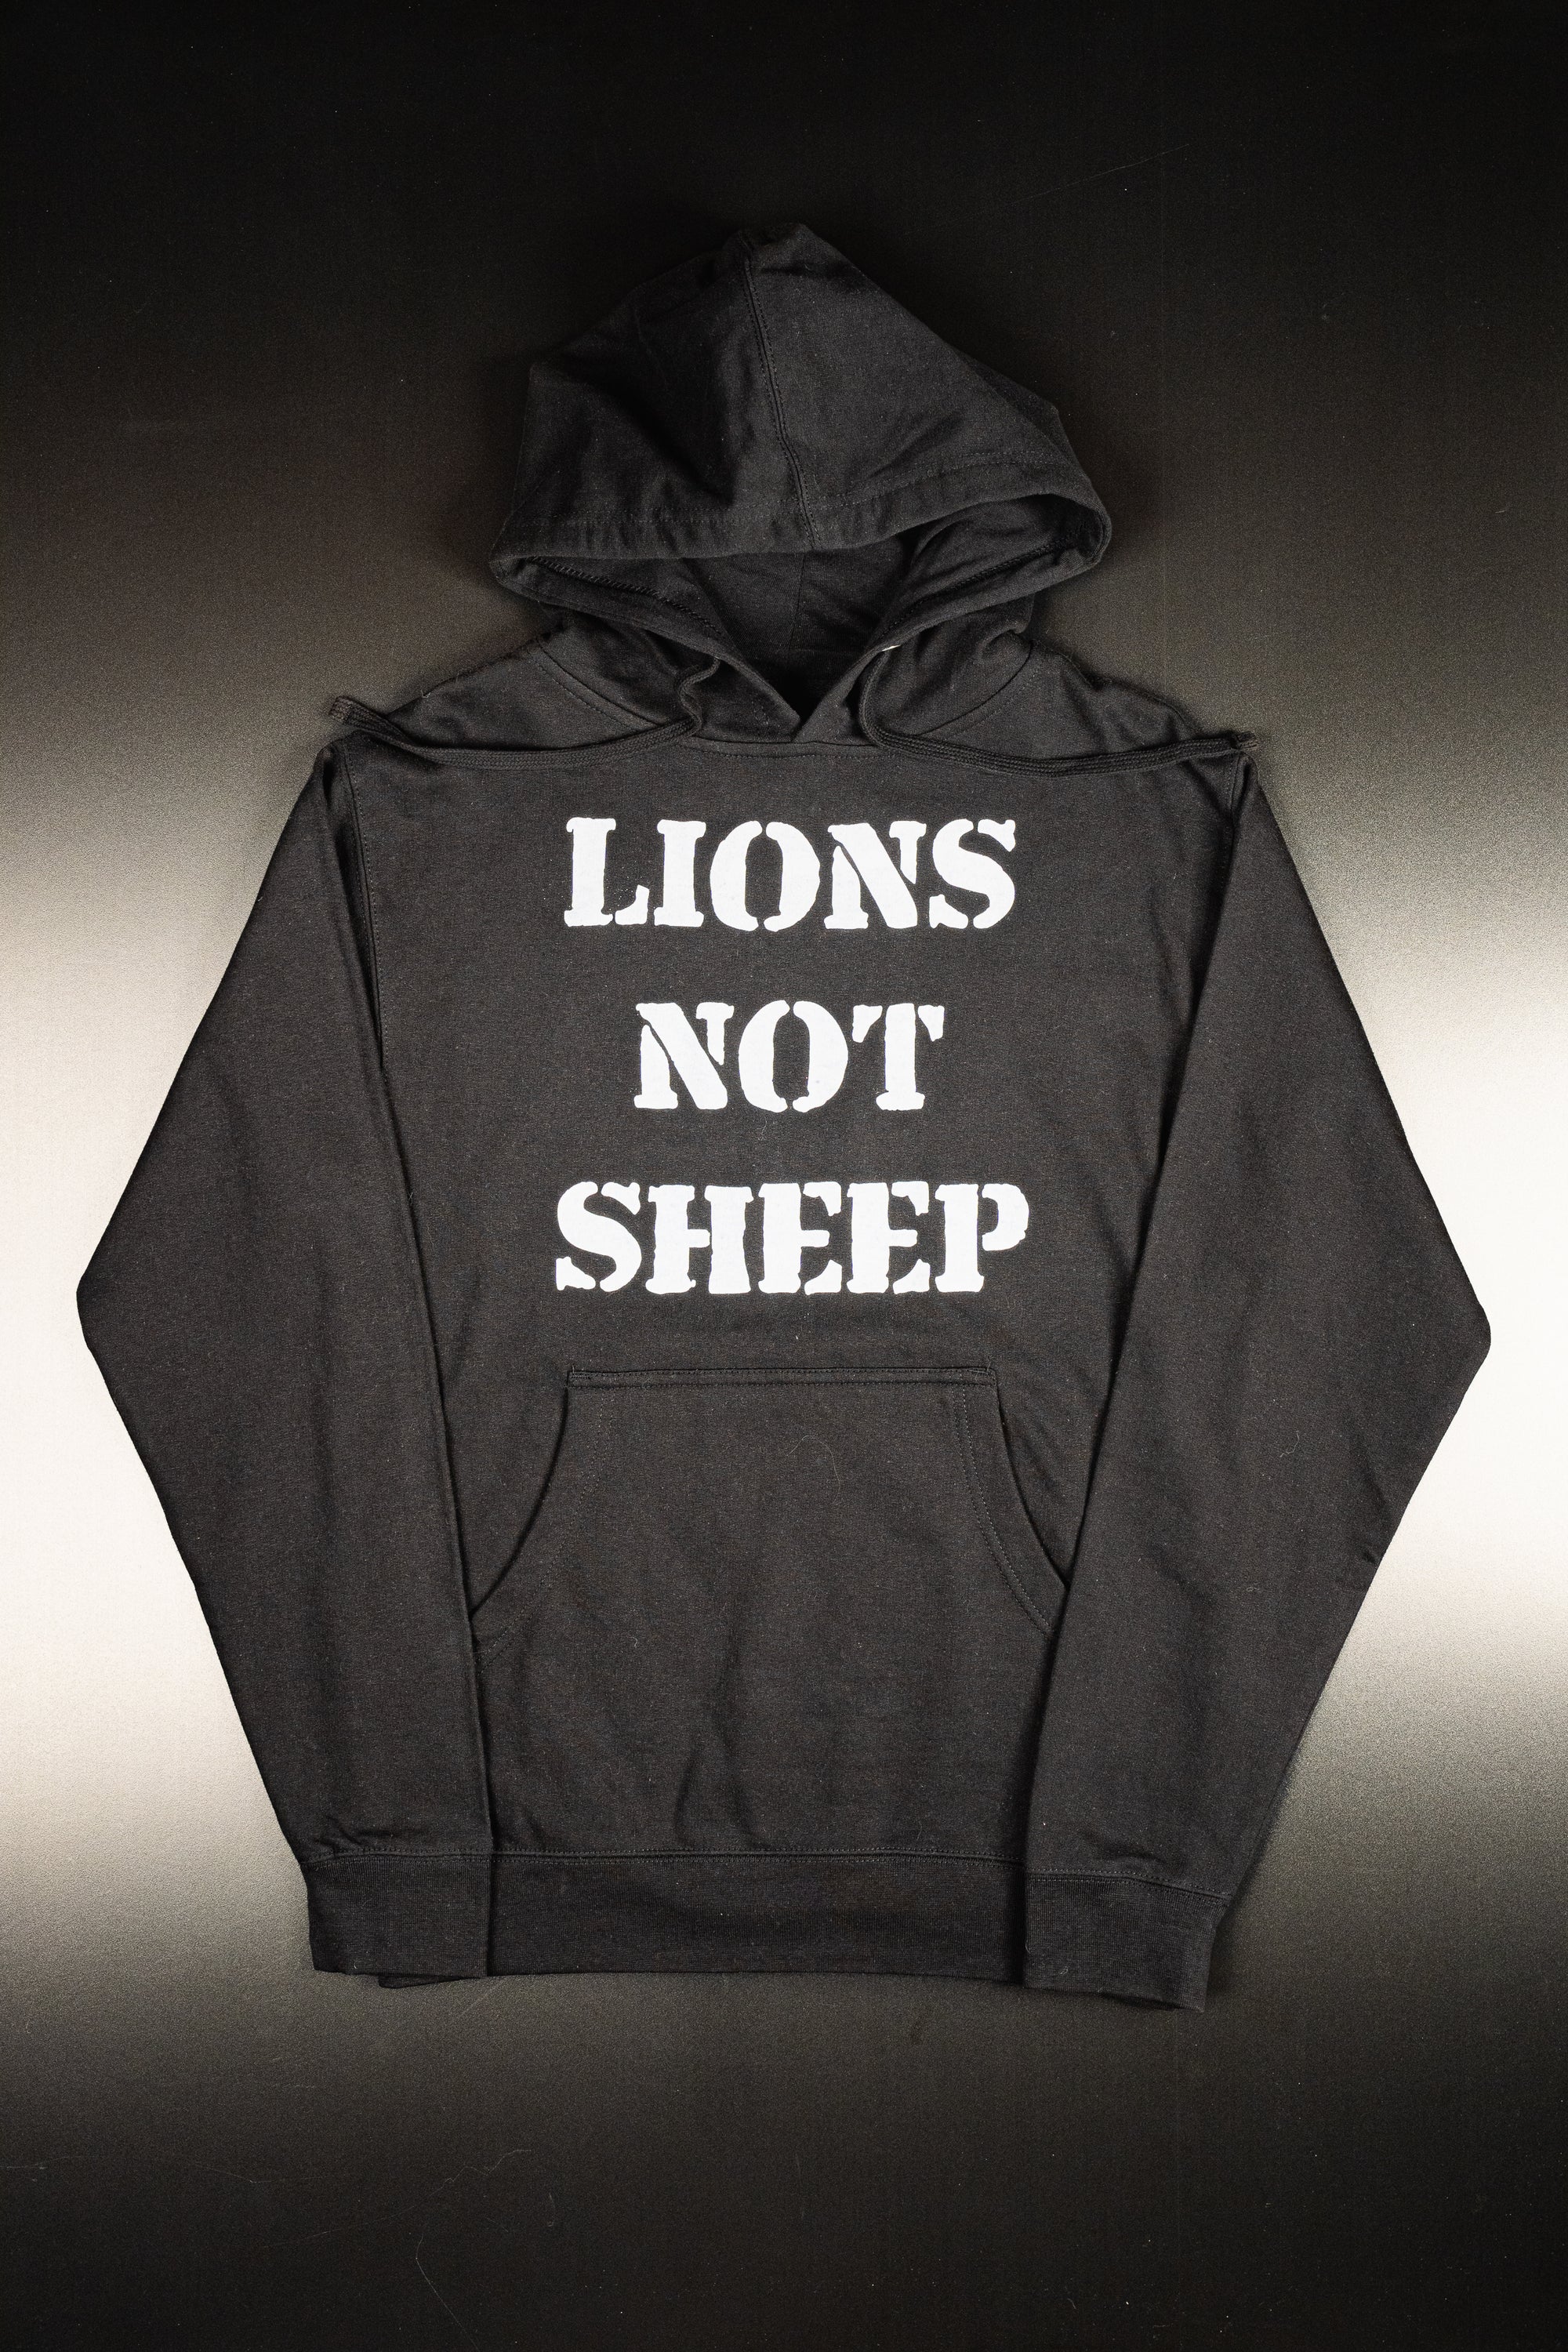 Lions Not Sheep "OG" Unisex Pullover Hoodie - Lions Not Sheep ®